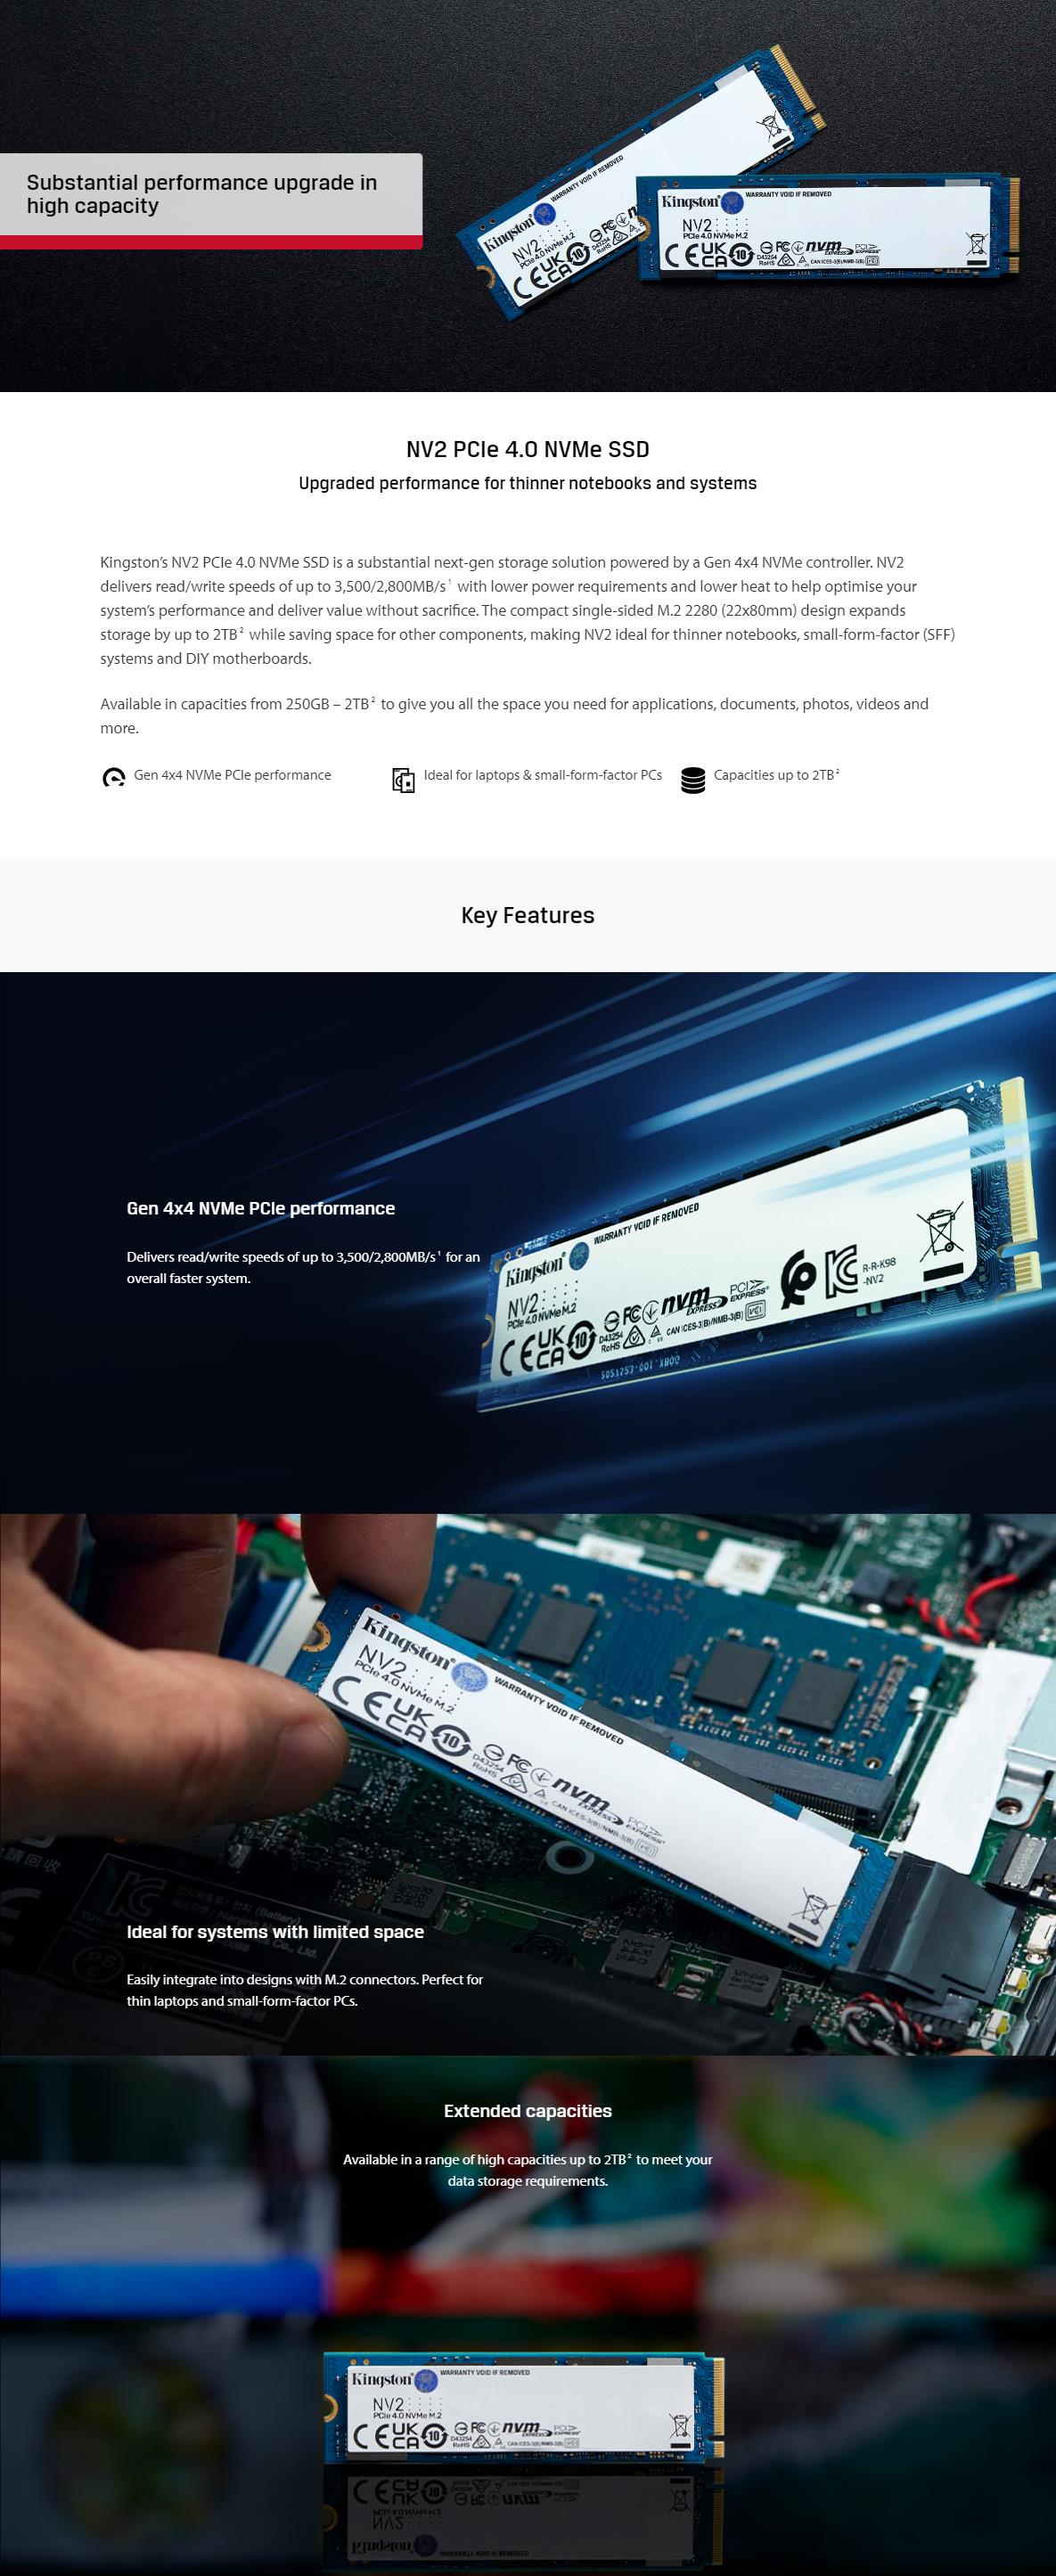 A large marketing image providing additional information about the product Kingston NV2 PCIe Gen4 NVMe M.2 SSD - 1TB - Additional alt info not provided